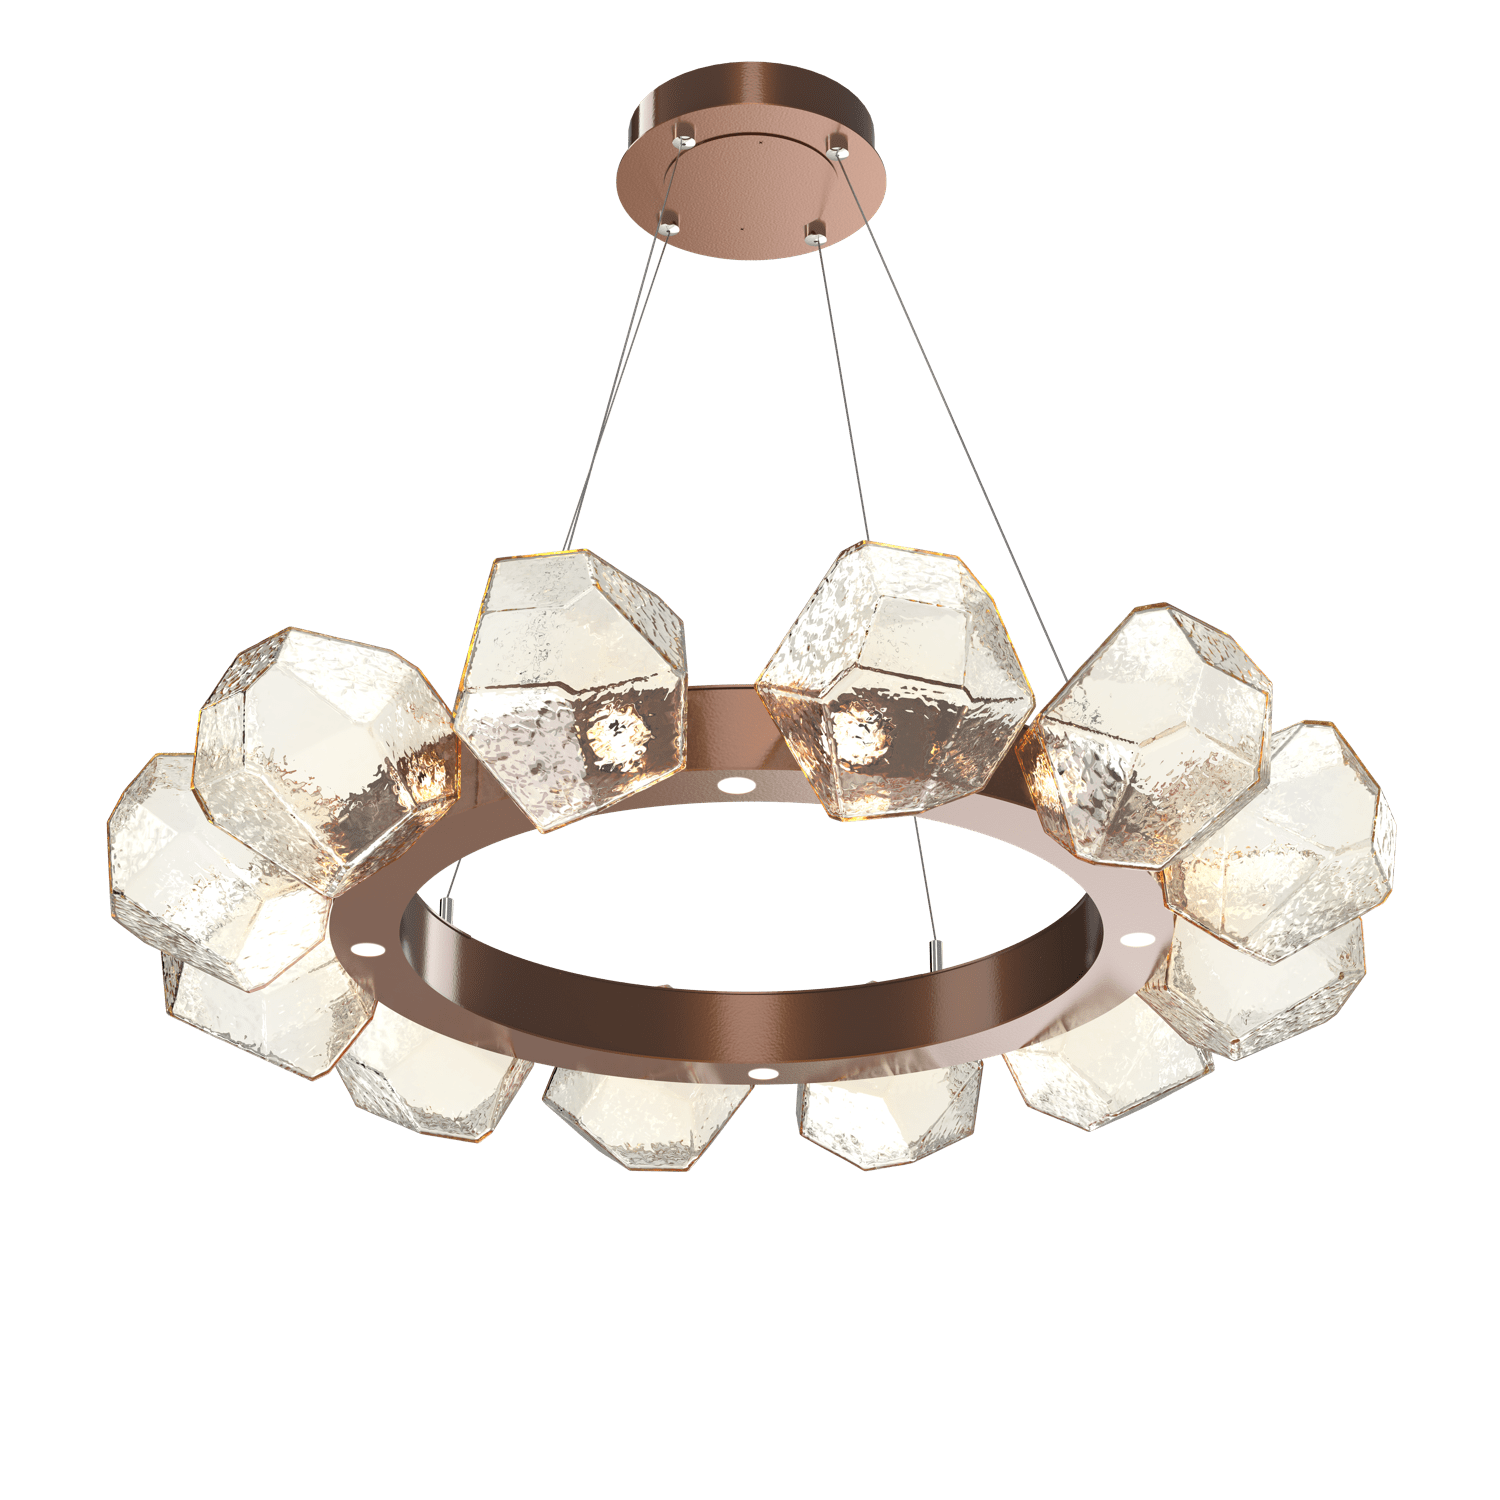 CHB0039-36-BB-A-Hammerton-Studio-Gem-36-inch-radial-ring-chandelier-with-burnished-bronze-finish-and-amber-blown-glass-shades-and-LED-lamping